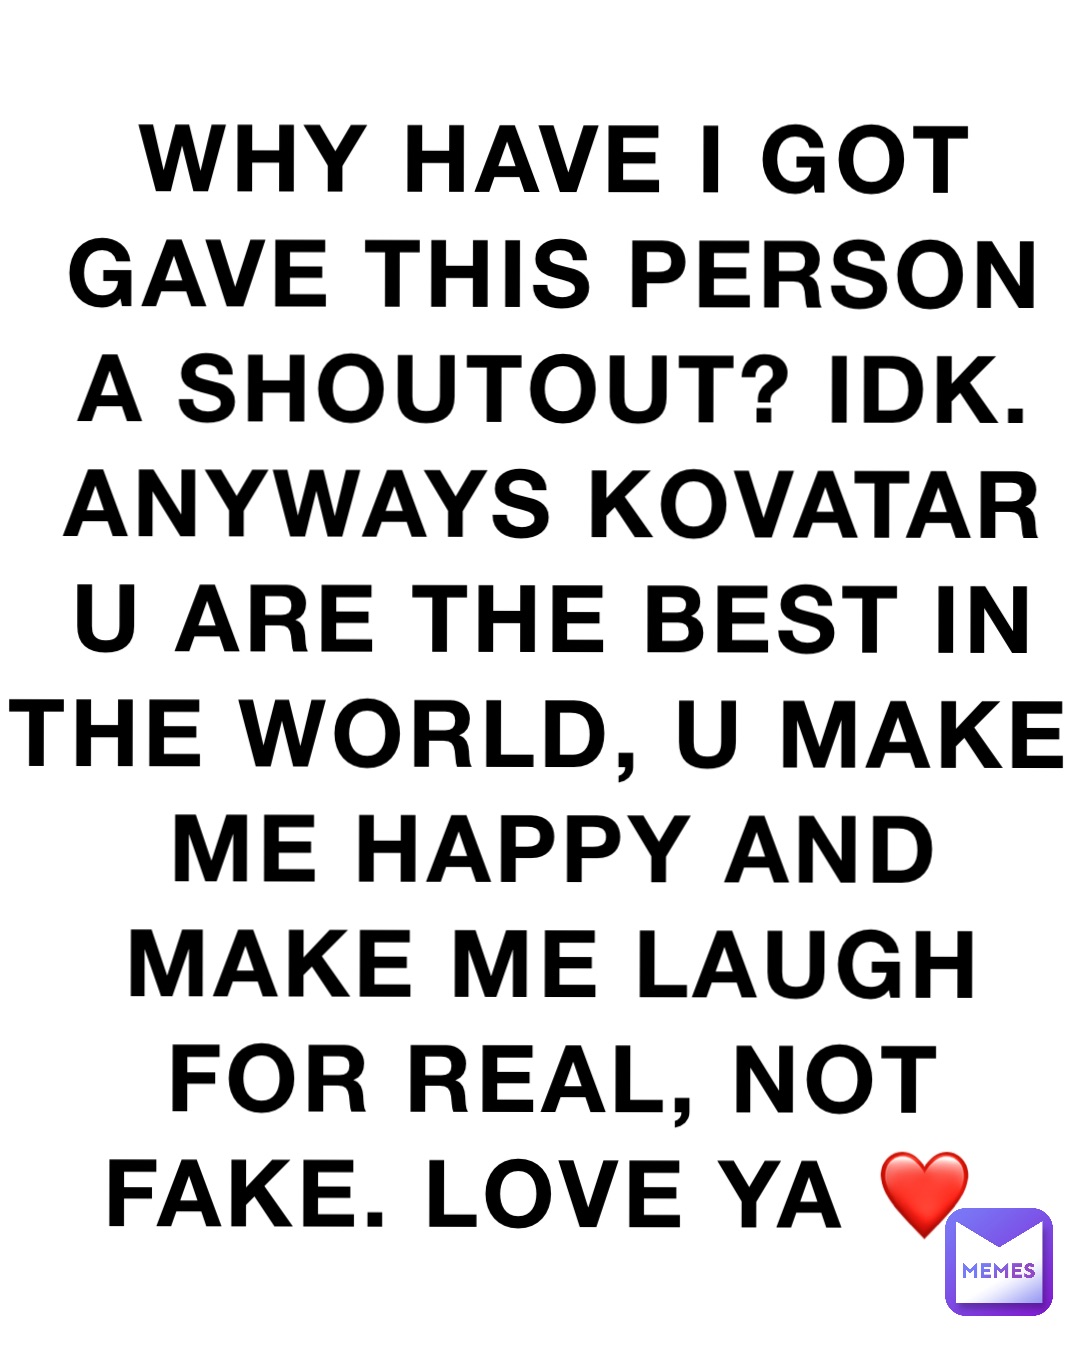 Why have I got gave this person a shoutout? Idk. Anyways kovatar u are the best in the world, u make me happy and make me laugh for real, not fake. Love ya ❤️